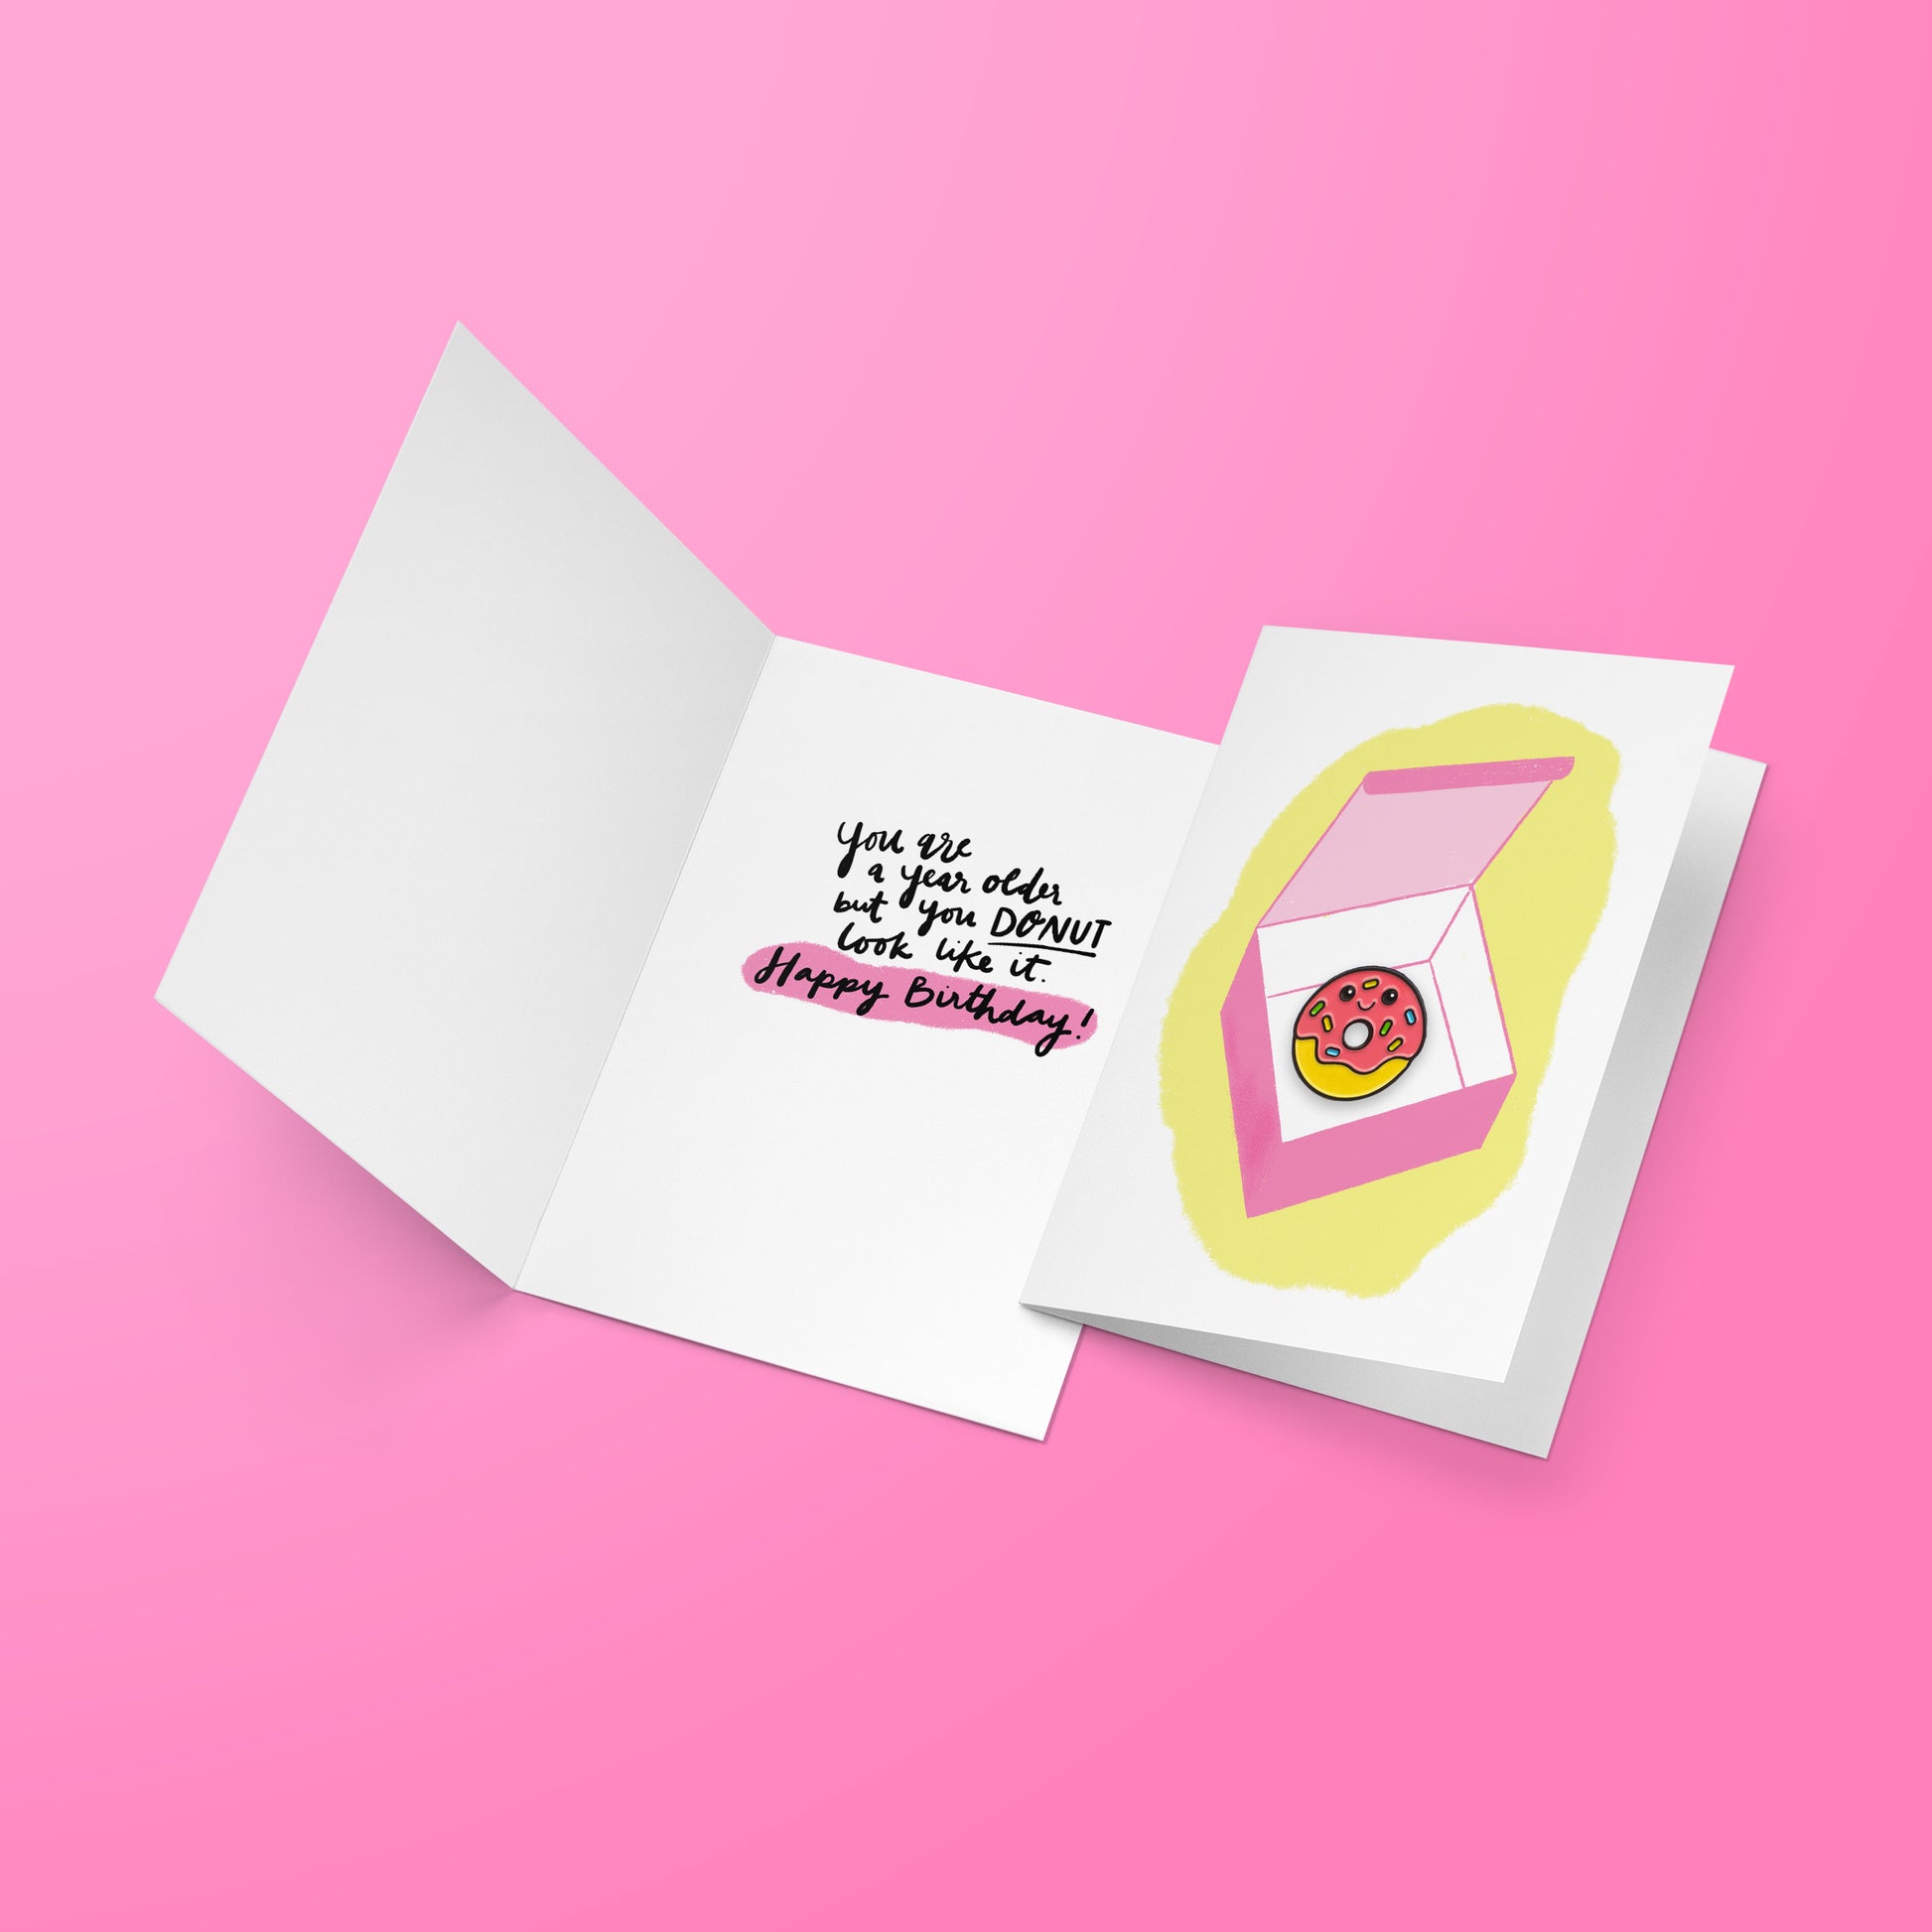 Happy Birthday Donut greeting card opened over pink background